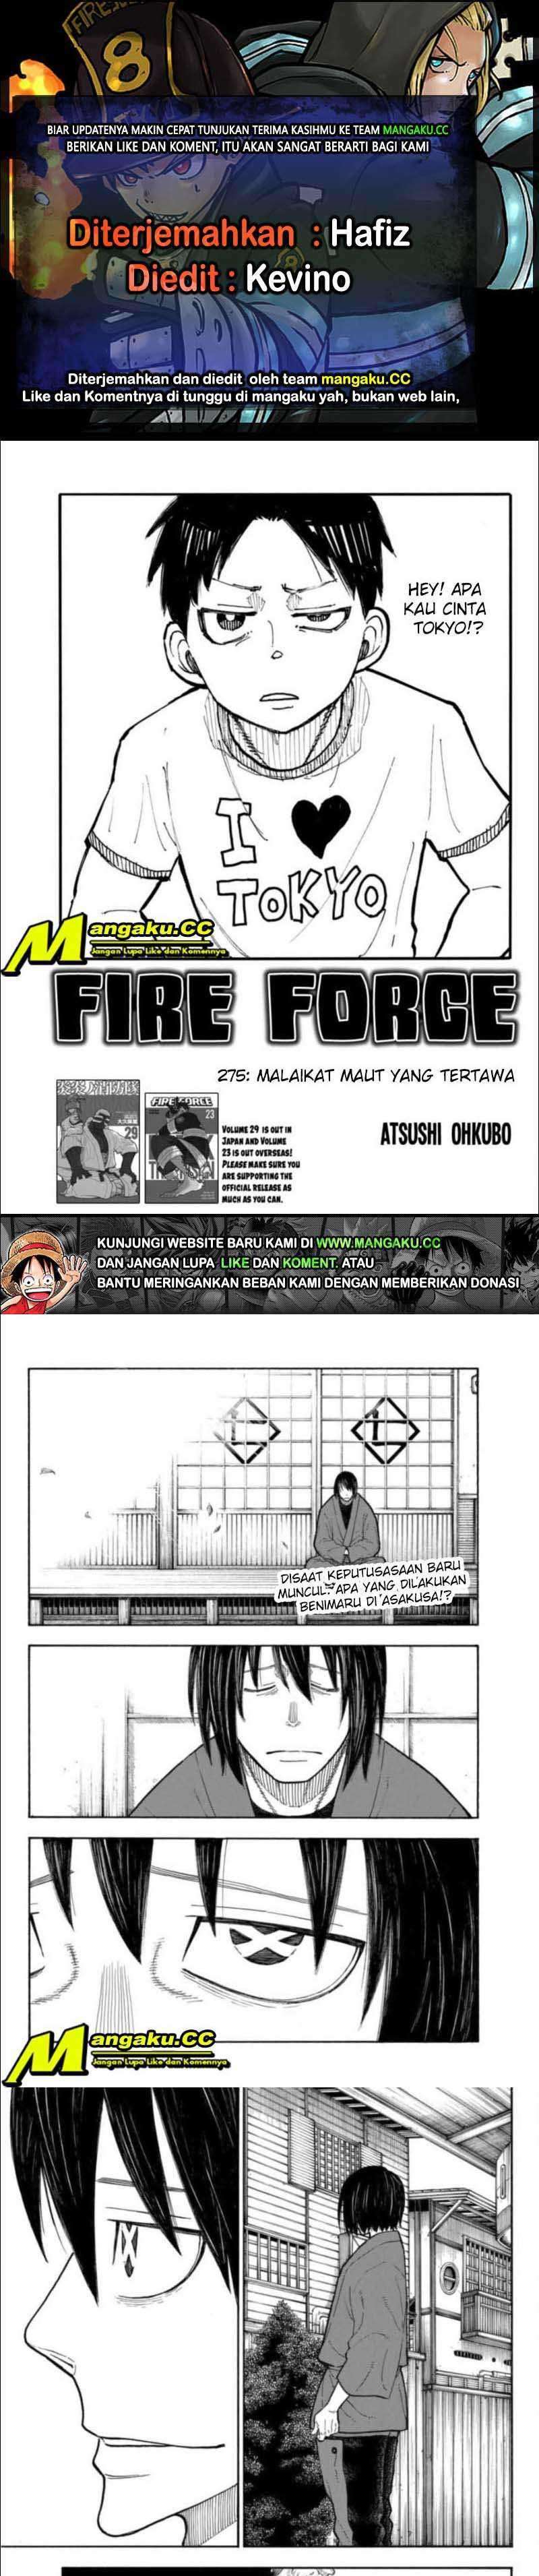 Fire Brigade of Flames Chapter 275